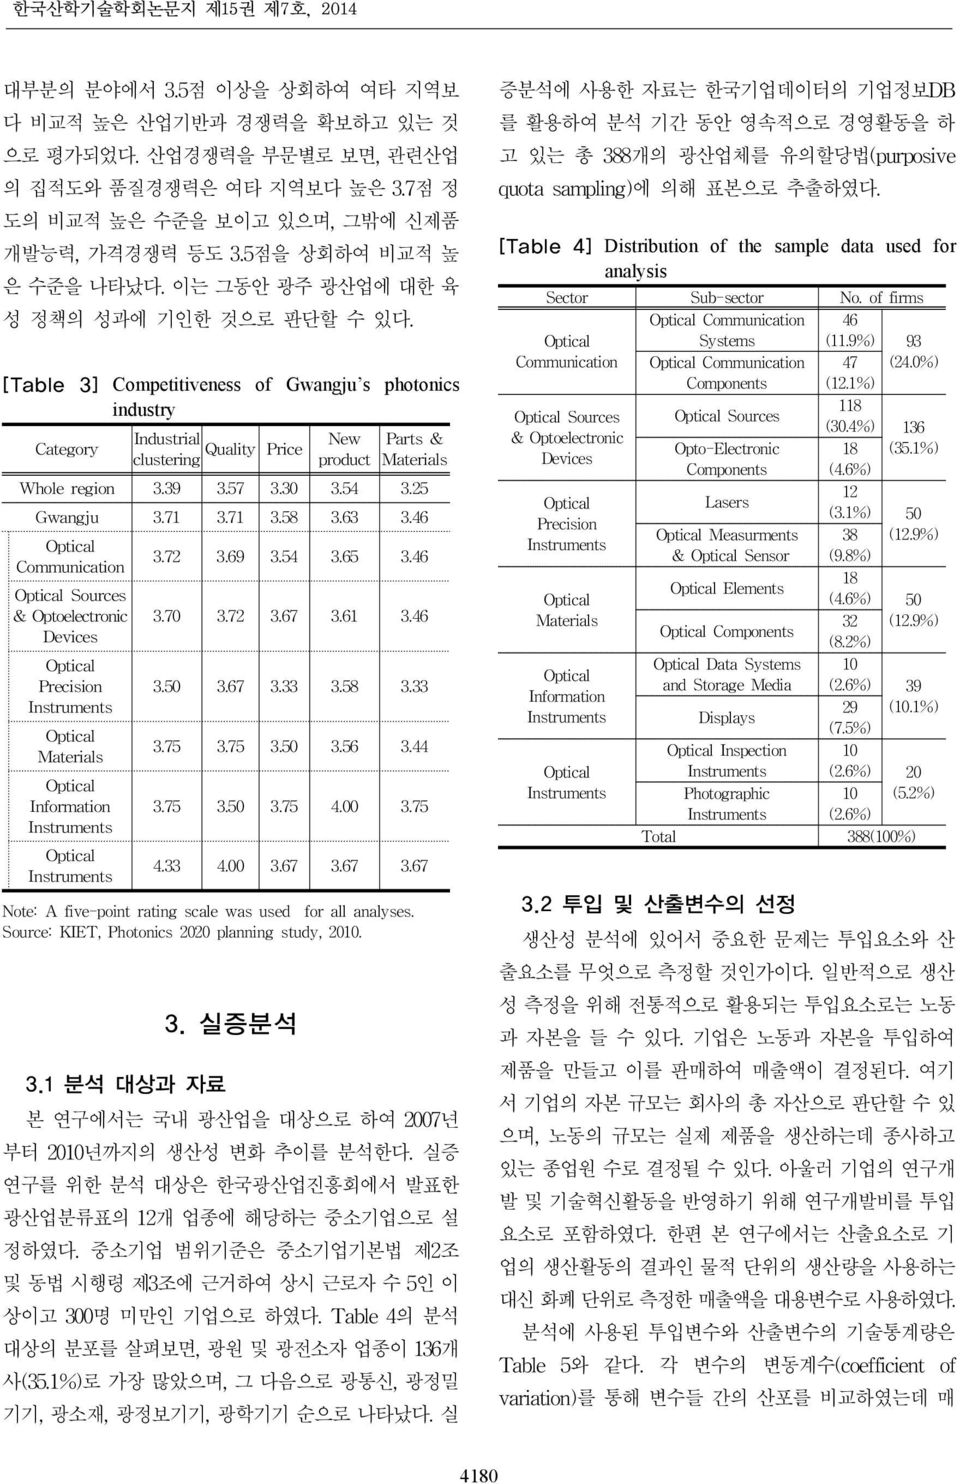 [Table 3] Competitiveness of Gwangju s photonics industry Category Industrial New Quality Price clustering product Parts & Whole region 3.39 3.57 3.30 3.54 3.25 Gwangju 3.71 3.71 3.58 3.63 3.46 3.